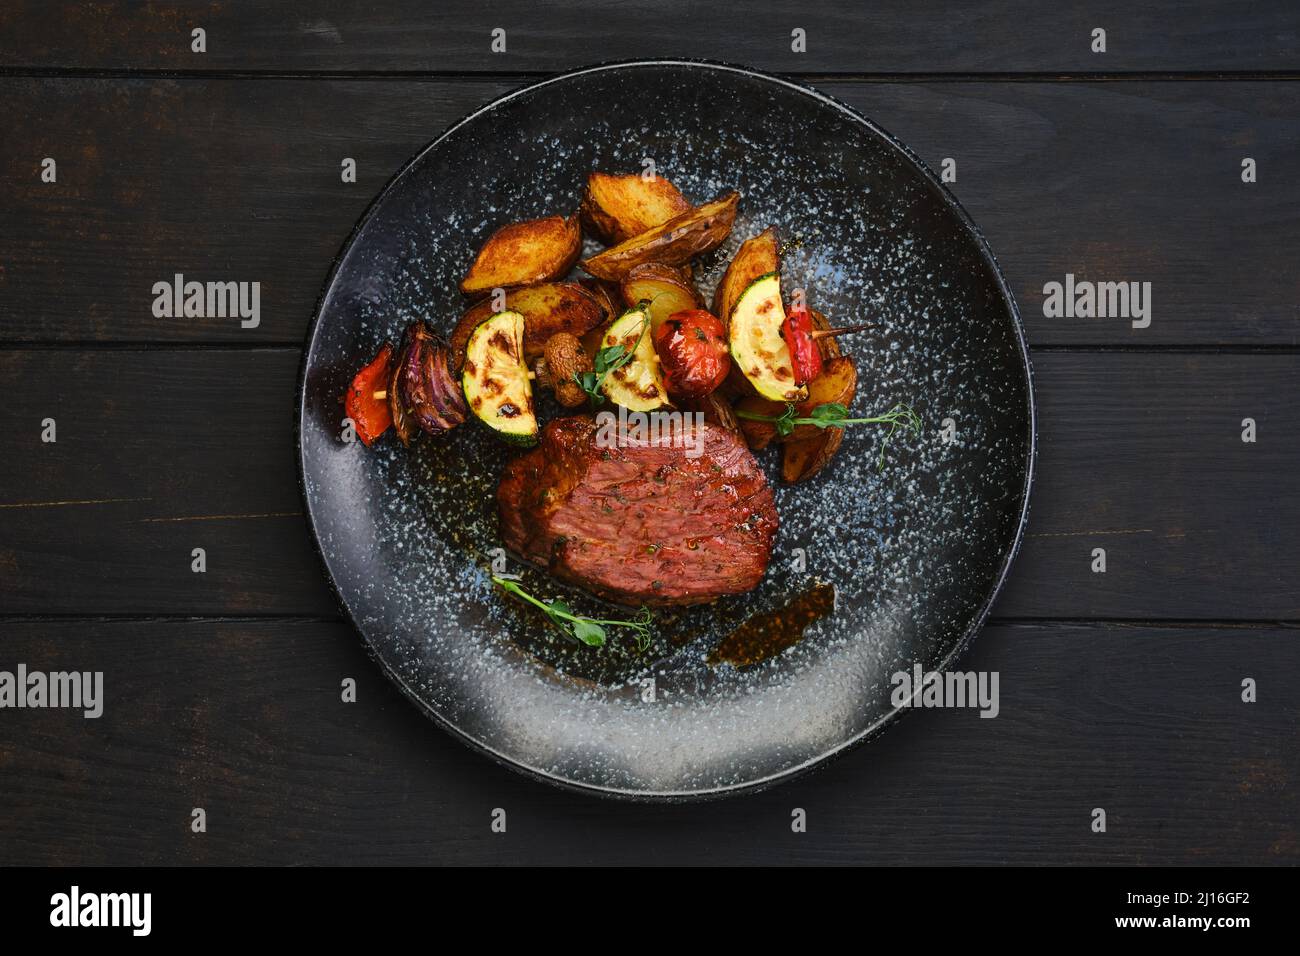 Top view of juicy beef steak with potato wedges and grilled vegetables on skewer Stock Photo